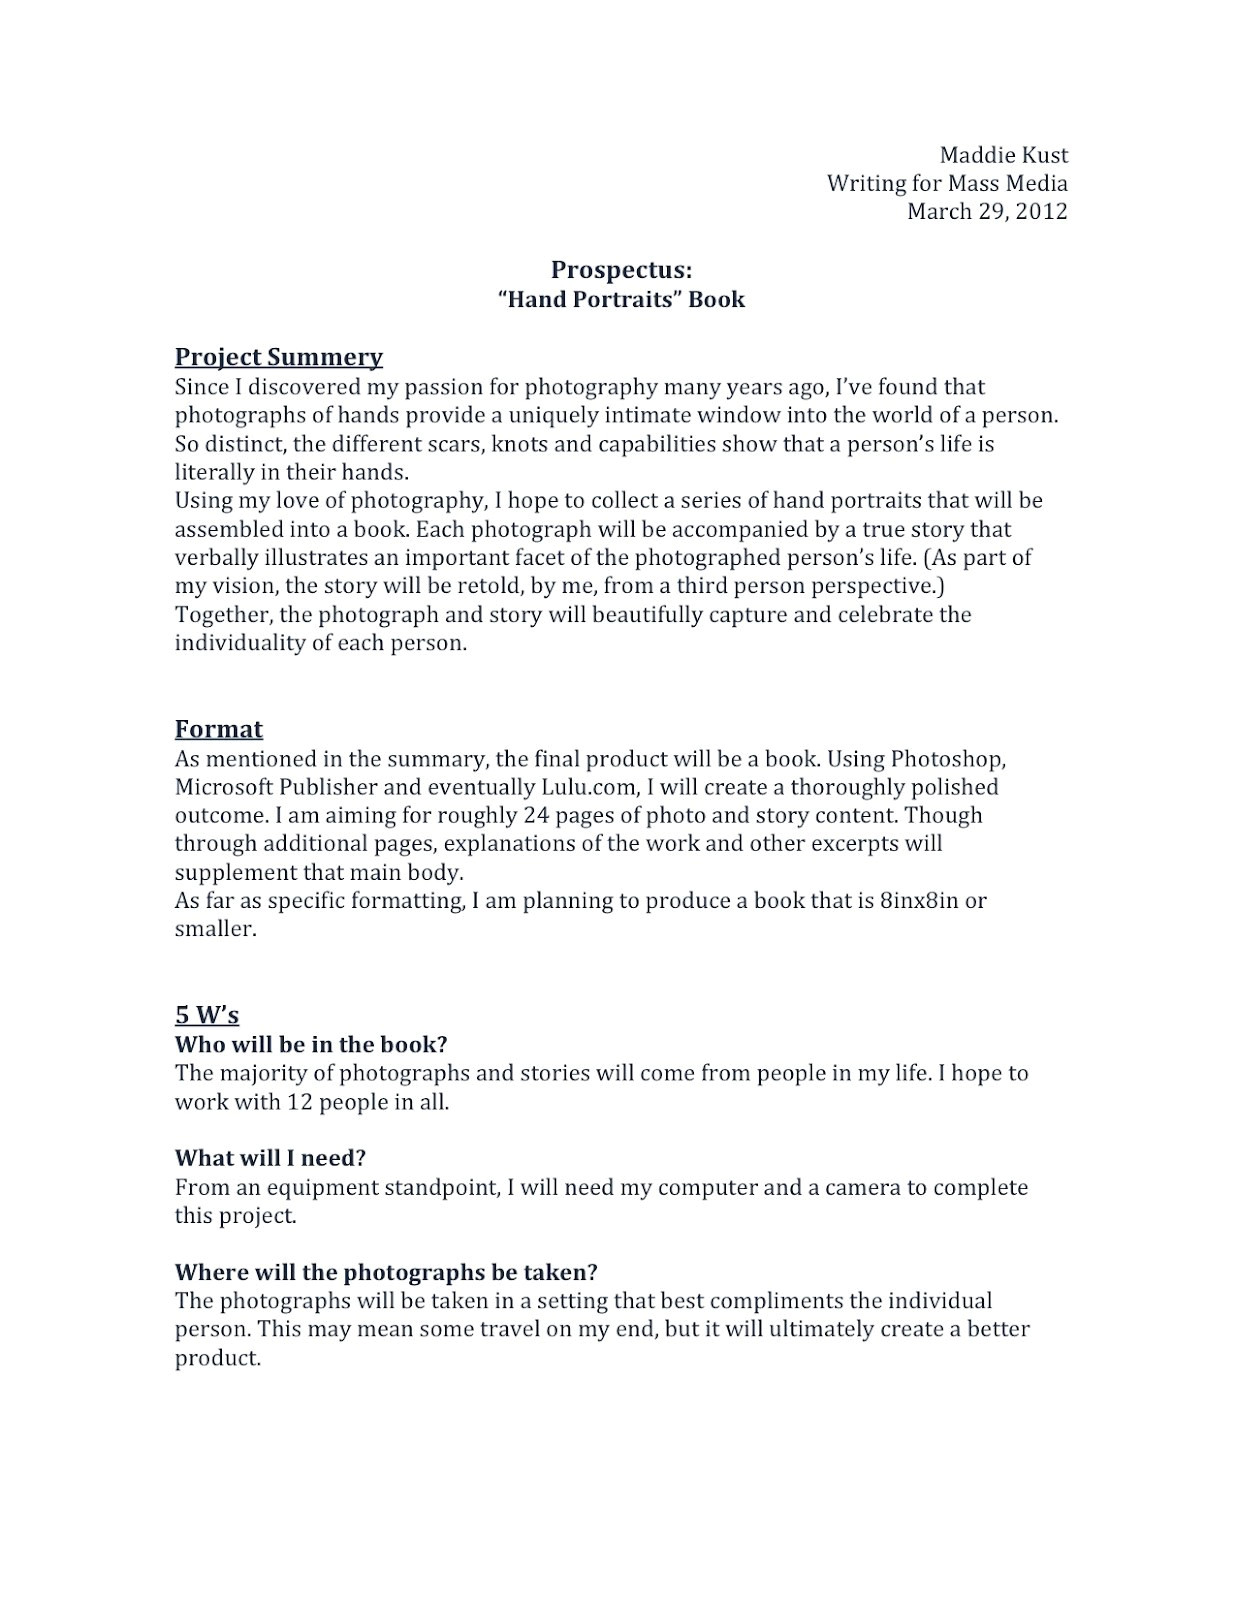 example of research prospectus paper